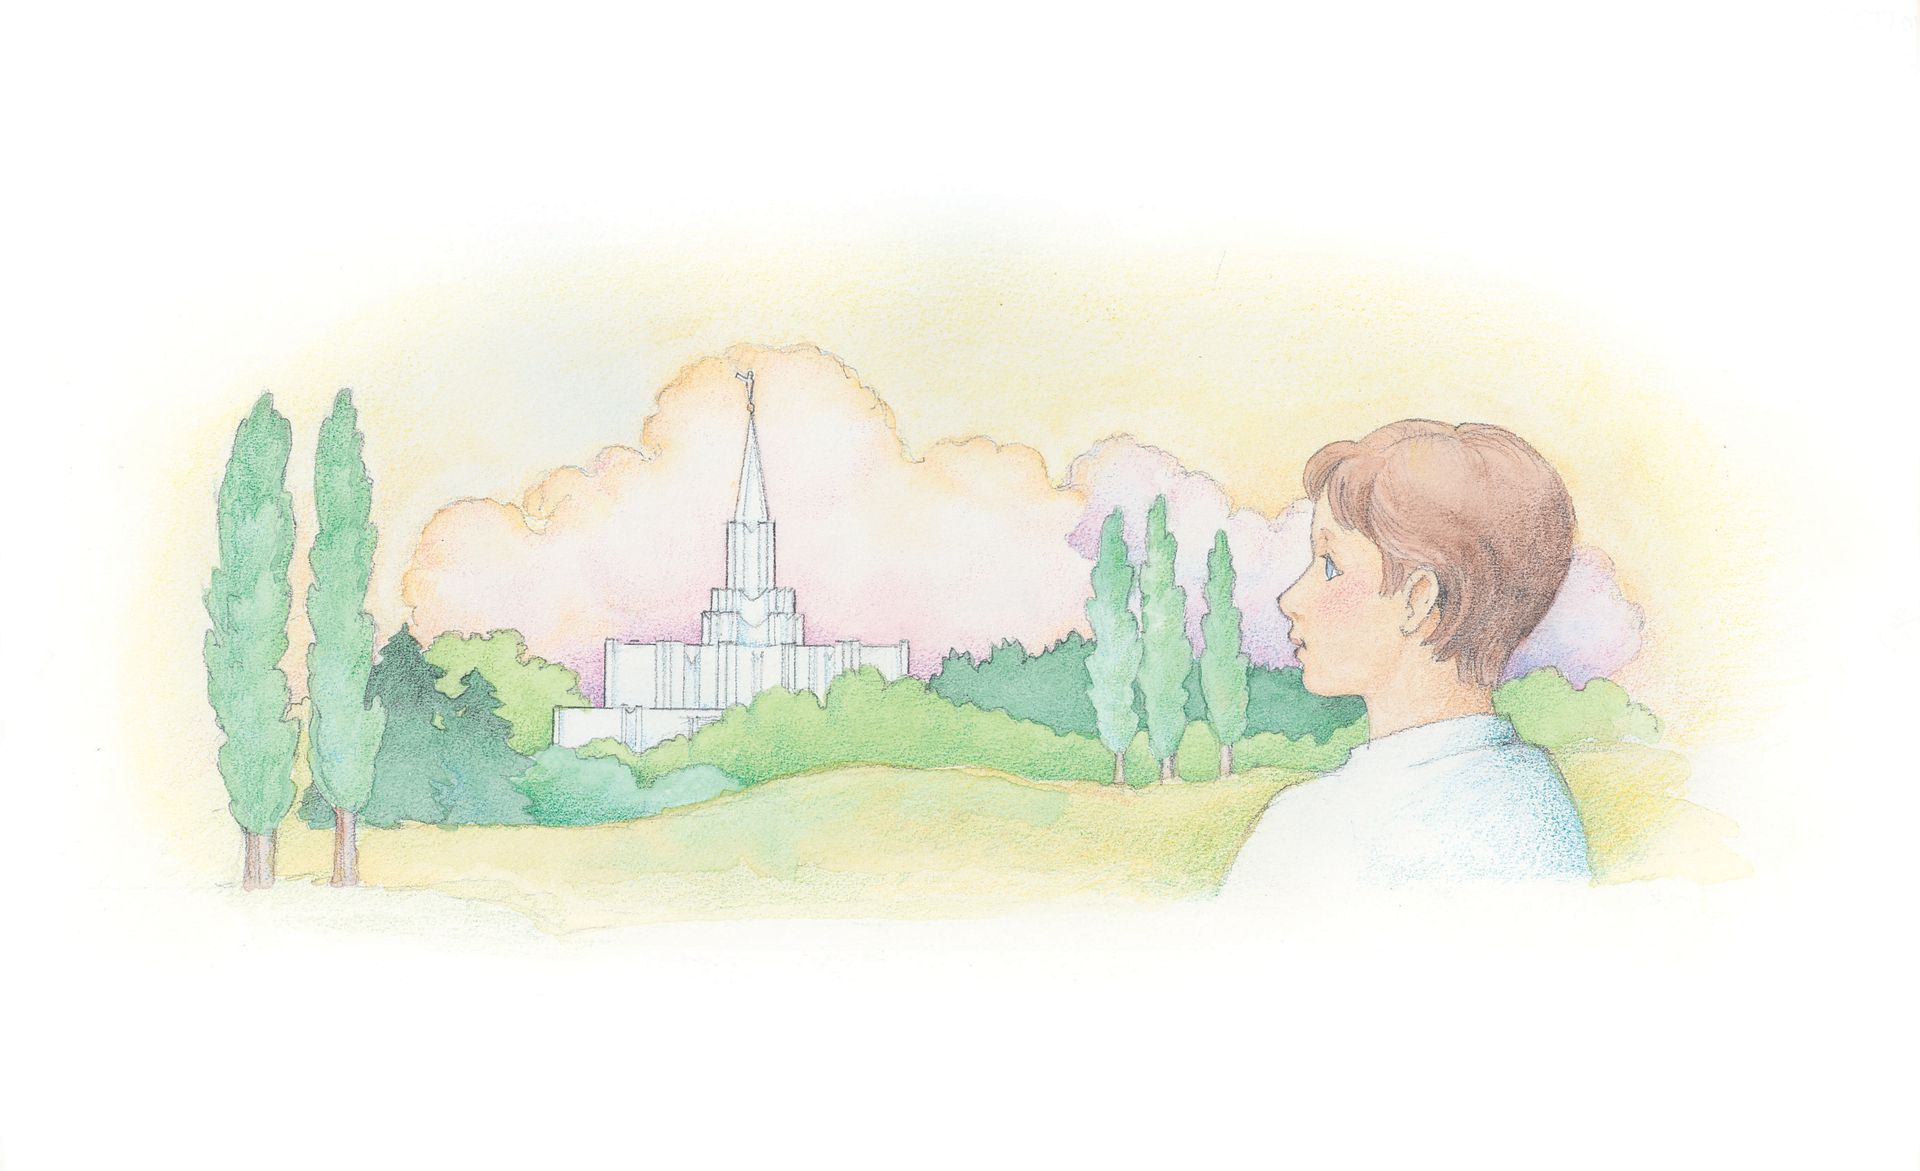 A boy looking toward a temple in the distance. From the Children’s Songbook, page 95, “I Love to See the Temple”; watercolor illustration by Phyllis Luch.